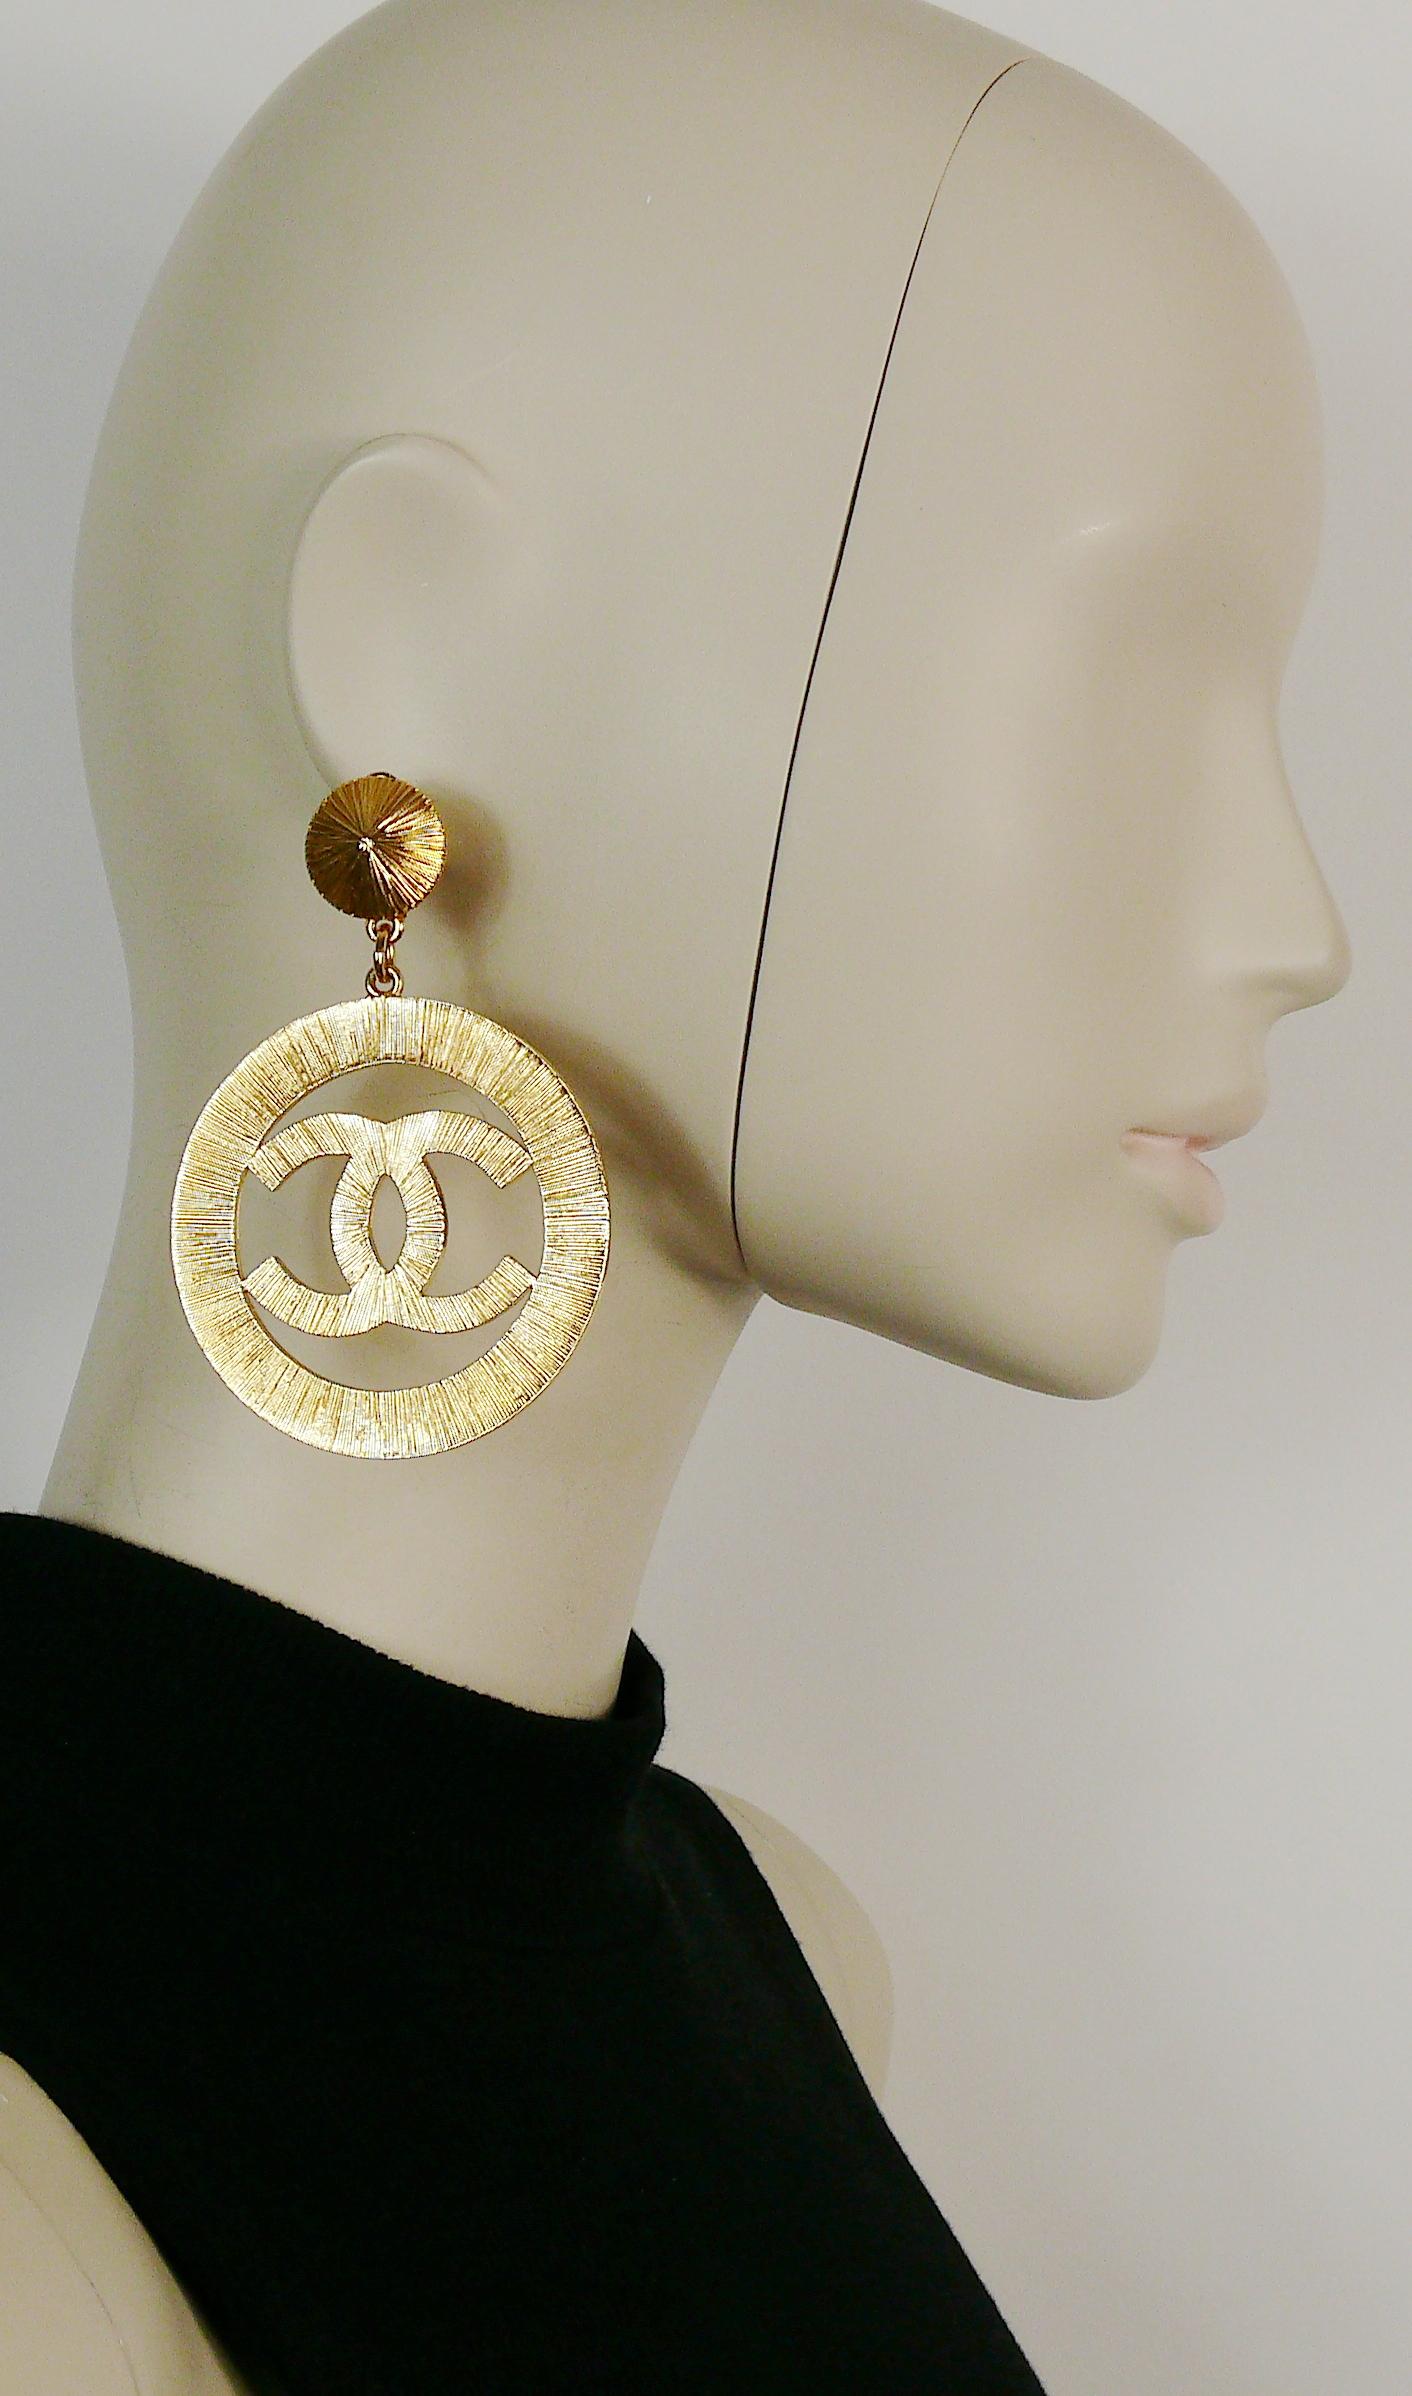 CHANEL vintage iconic and rare gold toned jumbo sunburst textured CC logo hoop dangling earrings (clip-on).

Collection n°27 (year : 1992).

Embossed CHANEL 2 7 Made in France.

Indicative measurements : height approx. 9 cm (3.54 inches) / max.